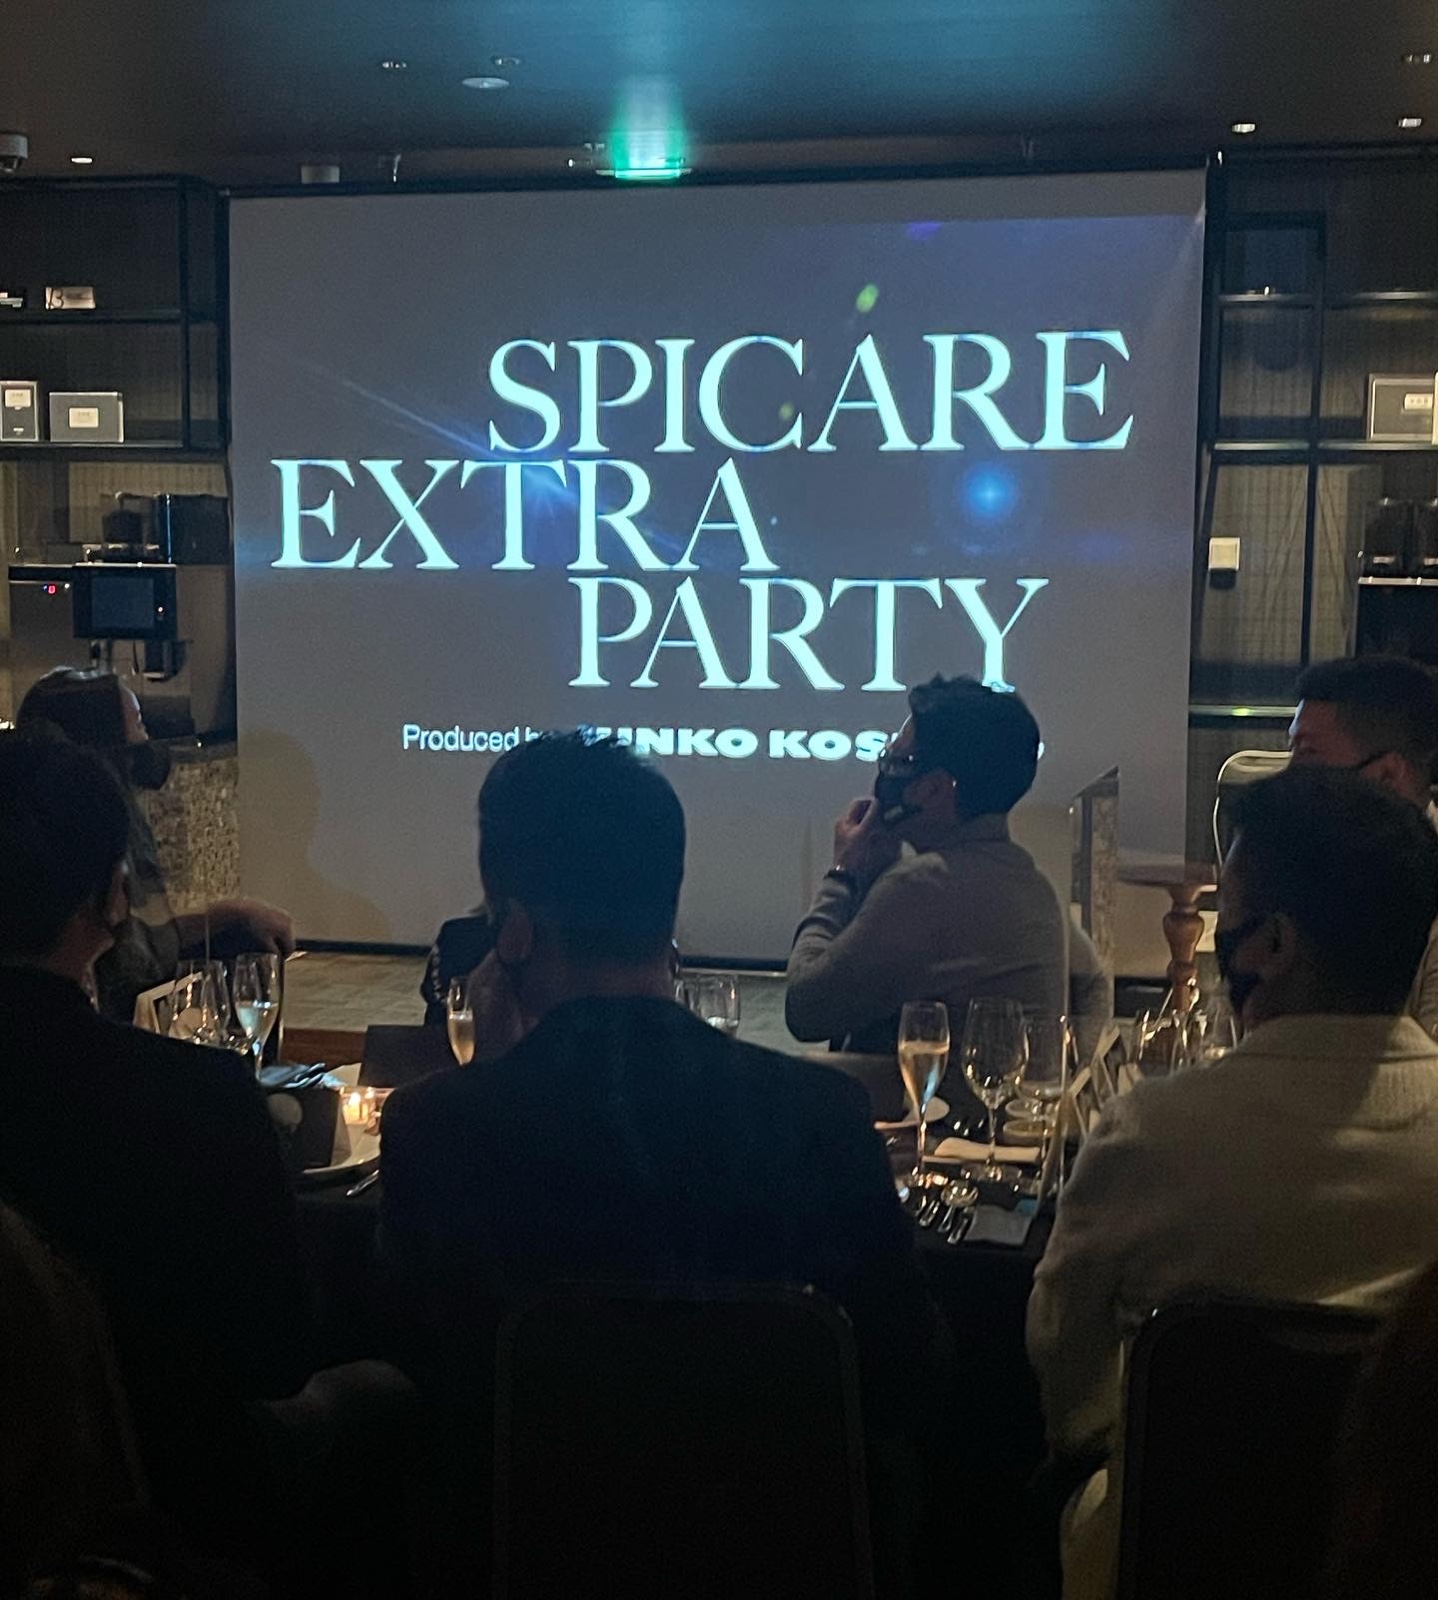 SPICARE EXTRA PARTYにご招待されました！